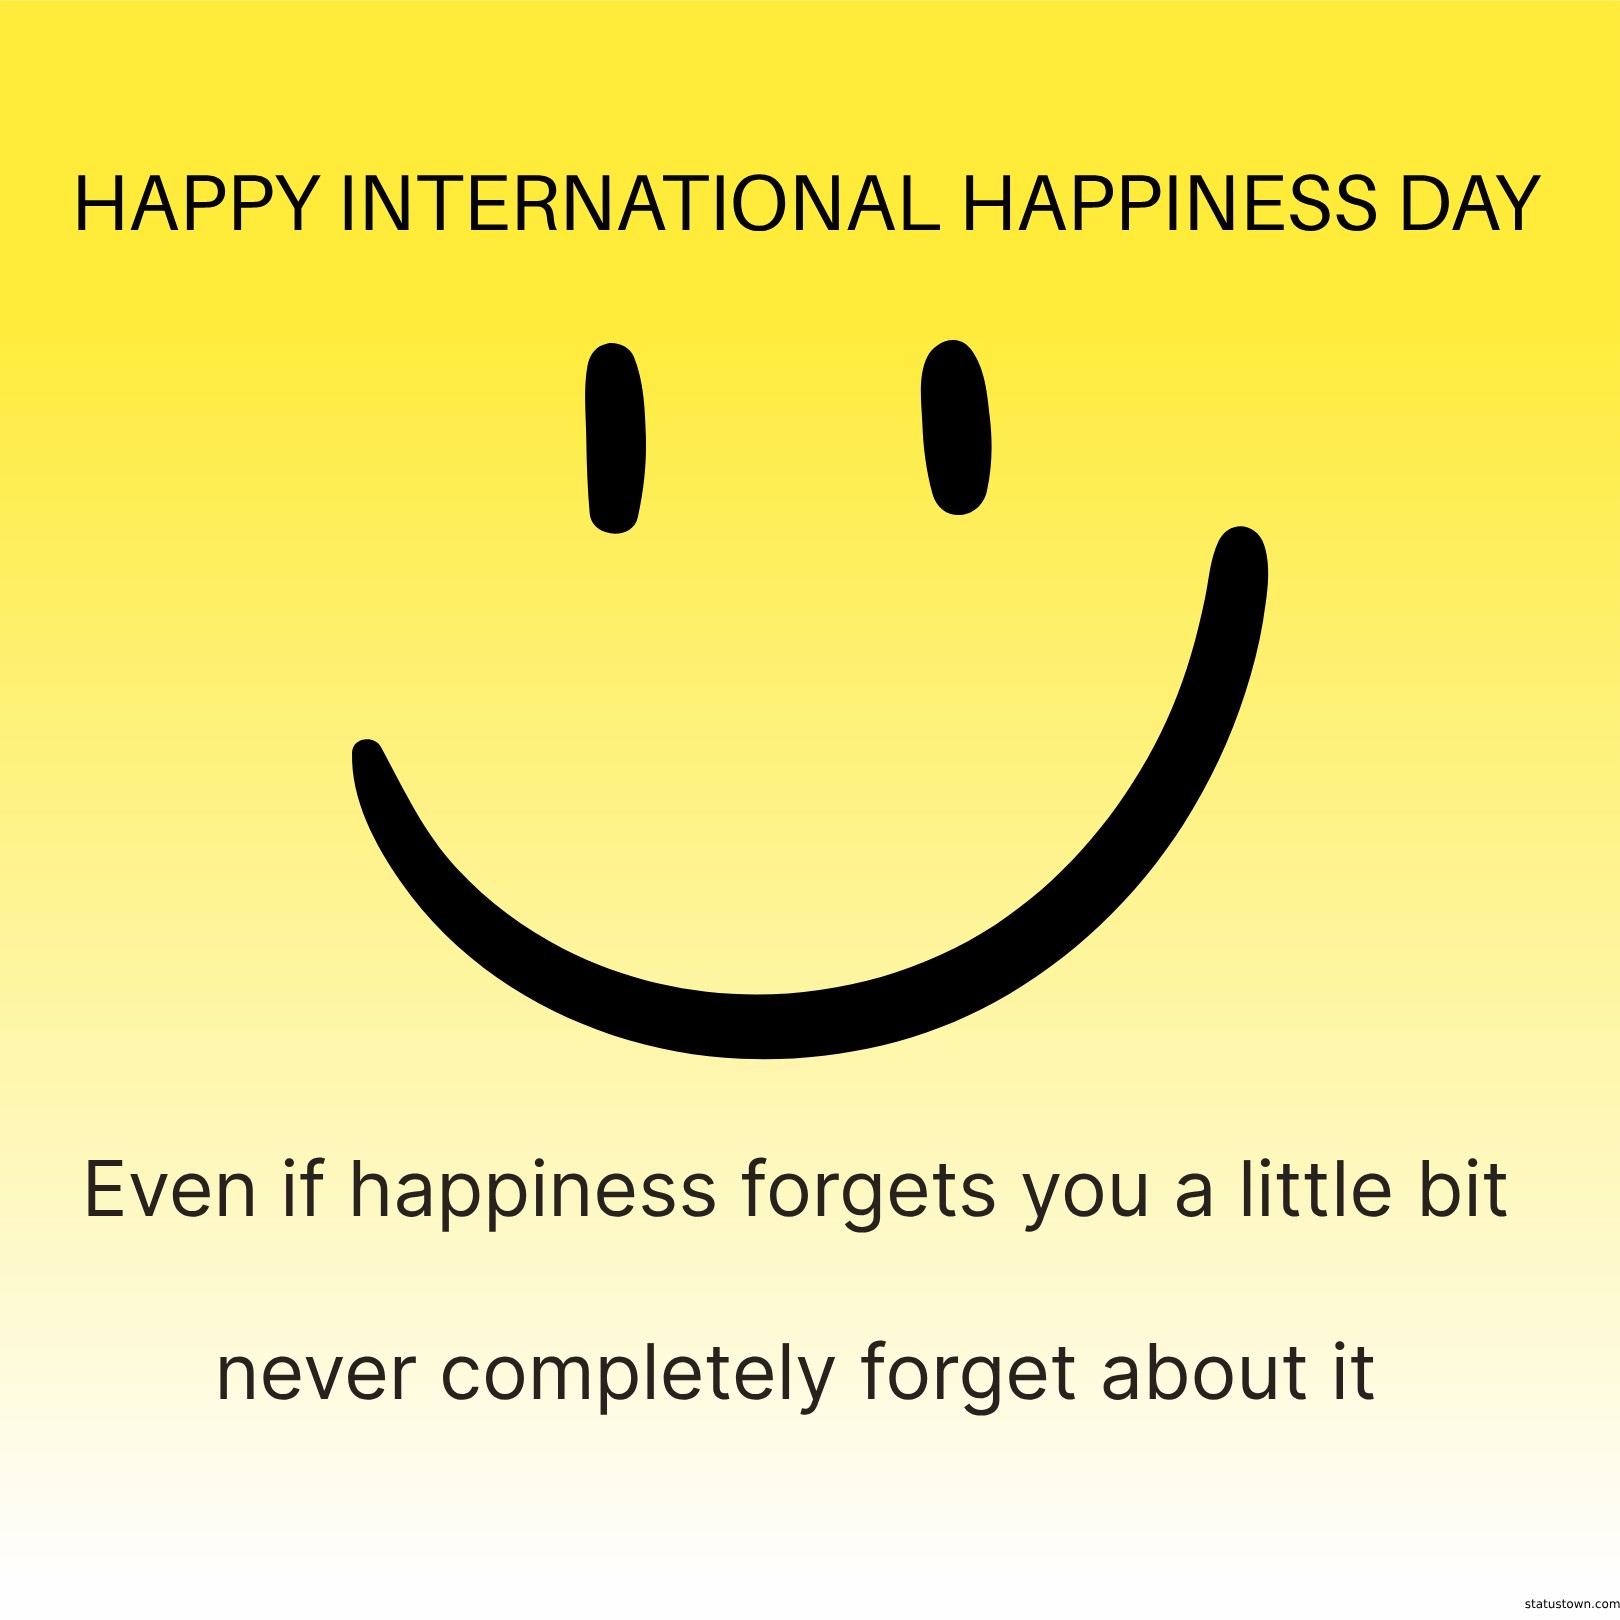 Even if happiness forgets you a little bit, never completely forget about it. - international day of happiness wishes wishes, messages, and status